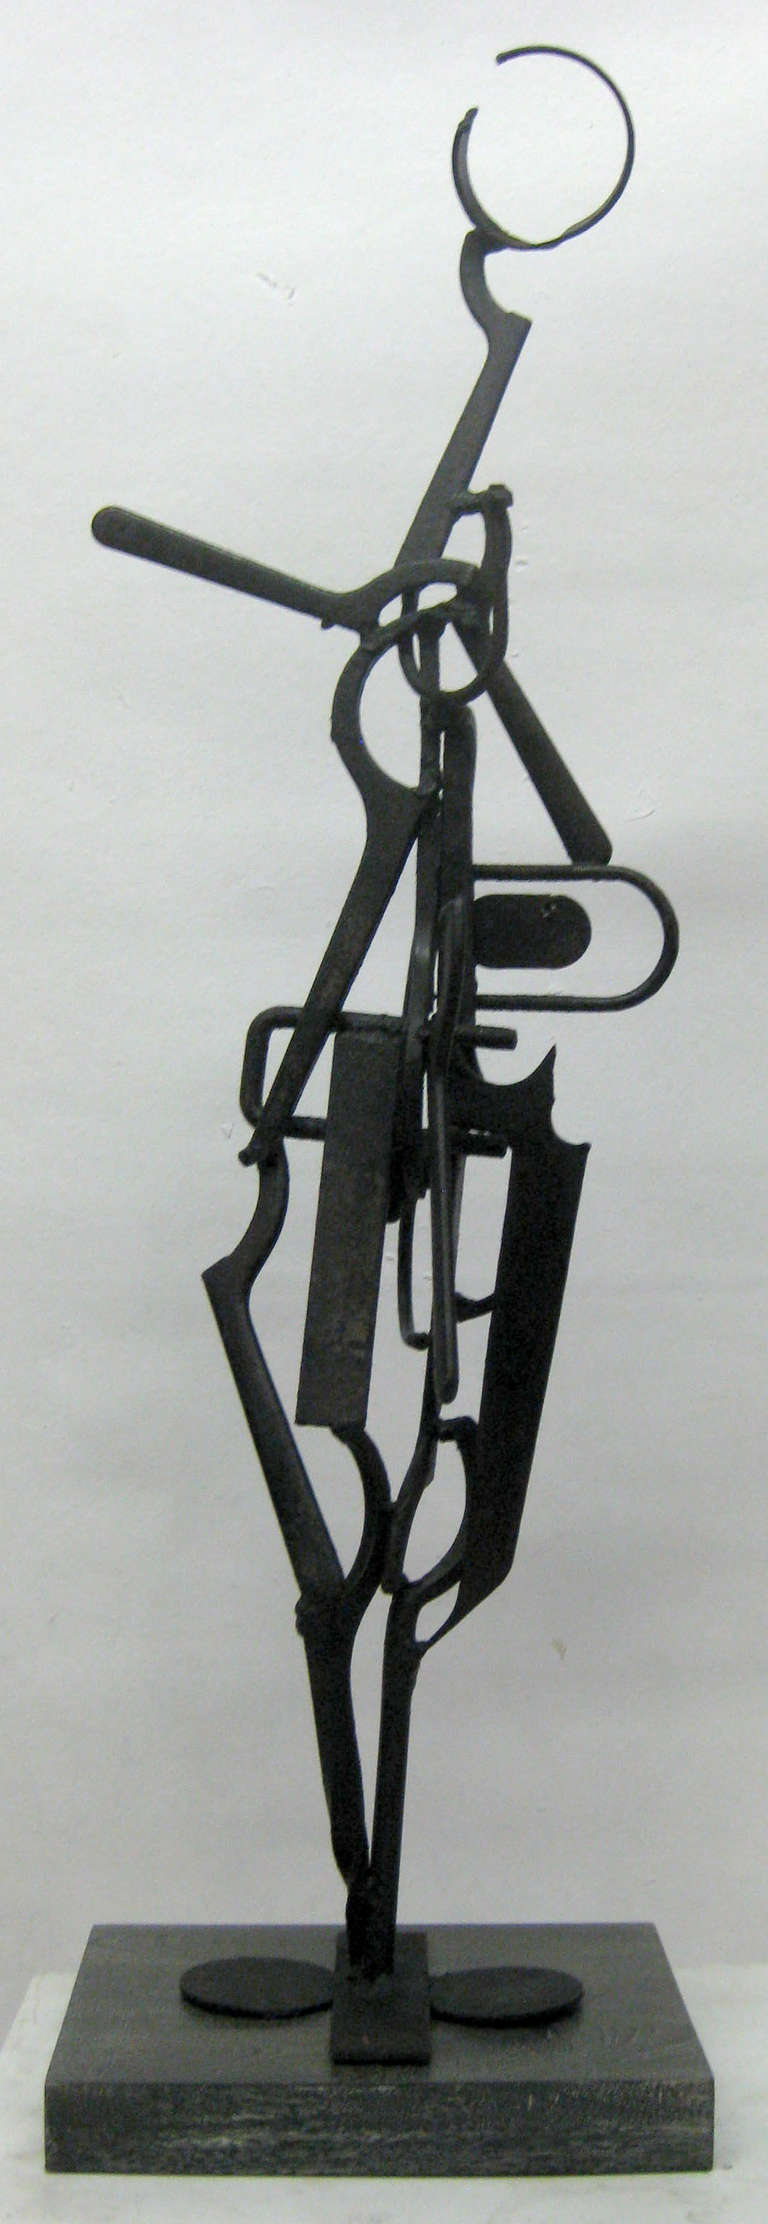 This Brutalist sculpture made of iron, is comprised of various tool parts arranged in a figural form and then painted black. The slightly humanoid piece sits atop a cerused wood base.